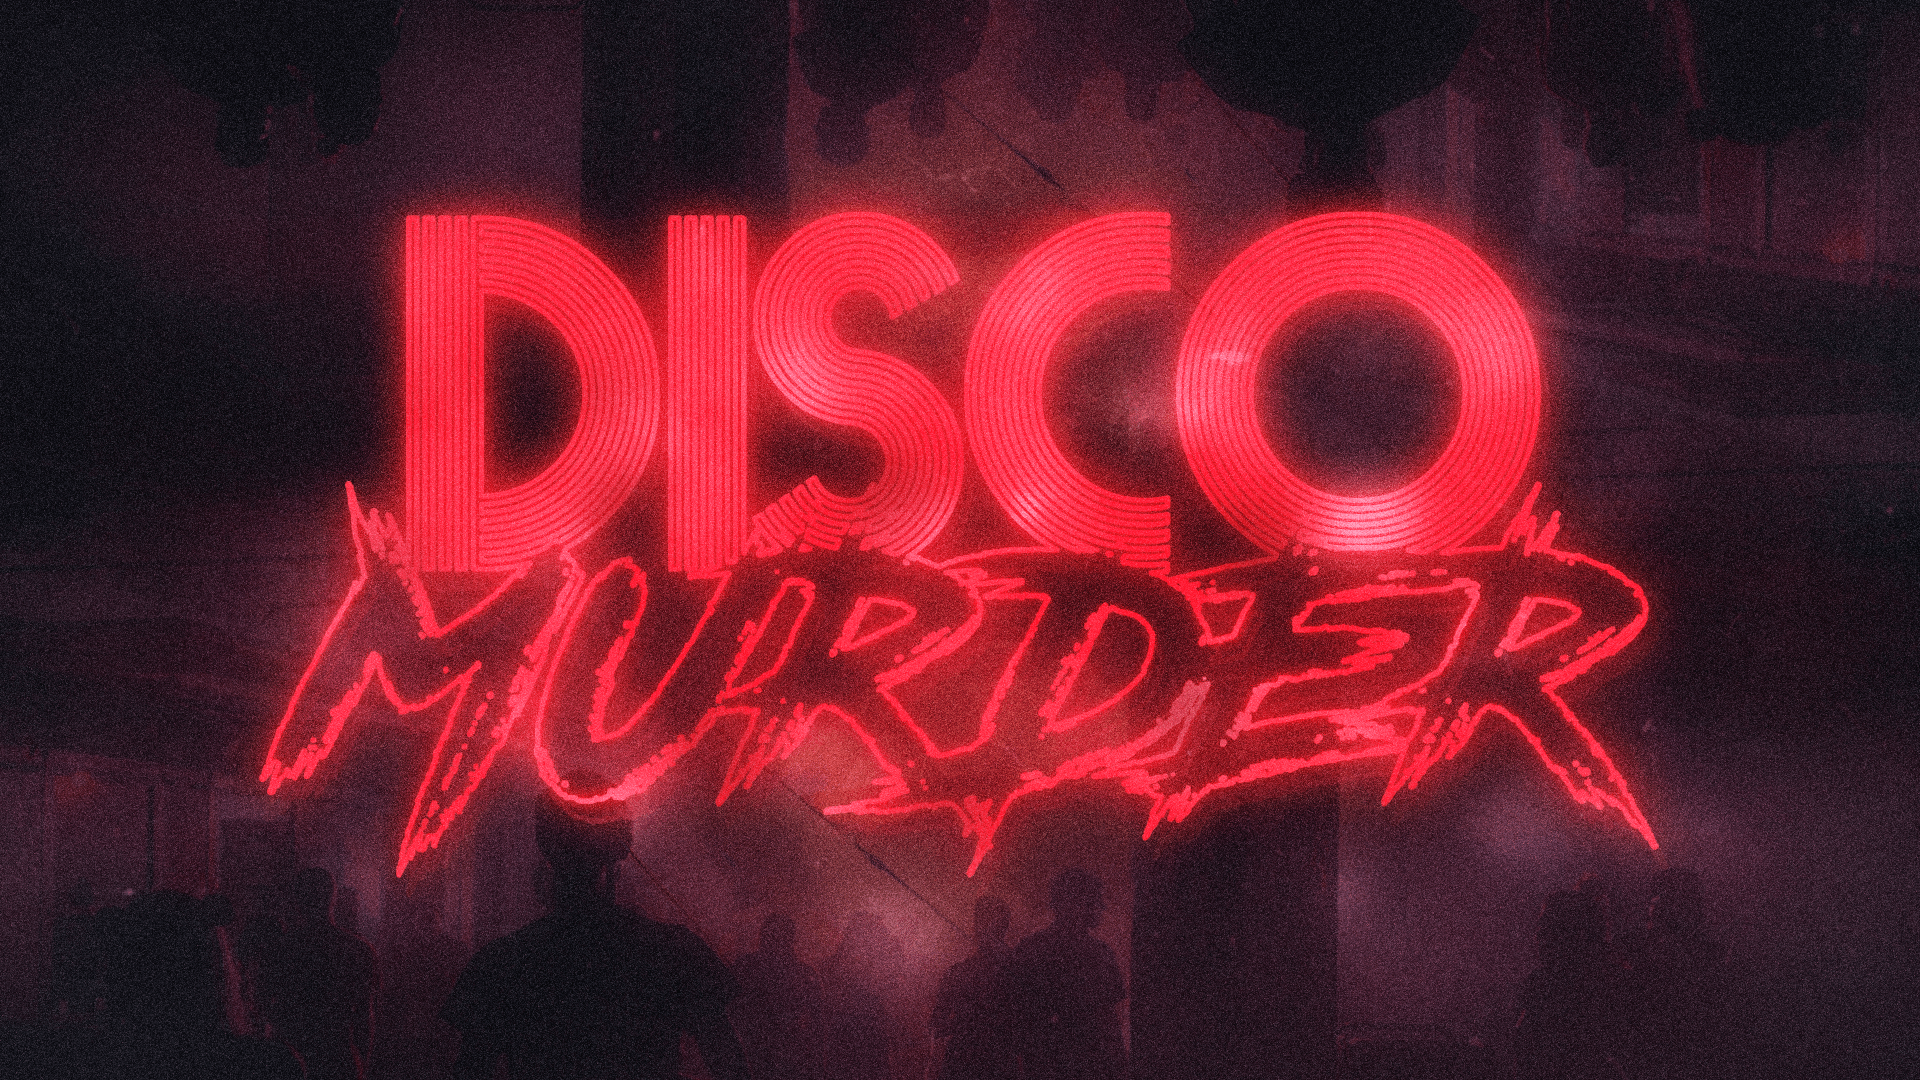 Disco Murder music video photocover depicting people in a dark nightclub. On the photo is red text that reads ‘Disco Murder.’